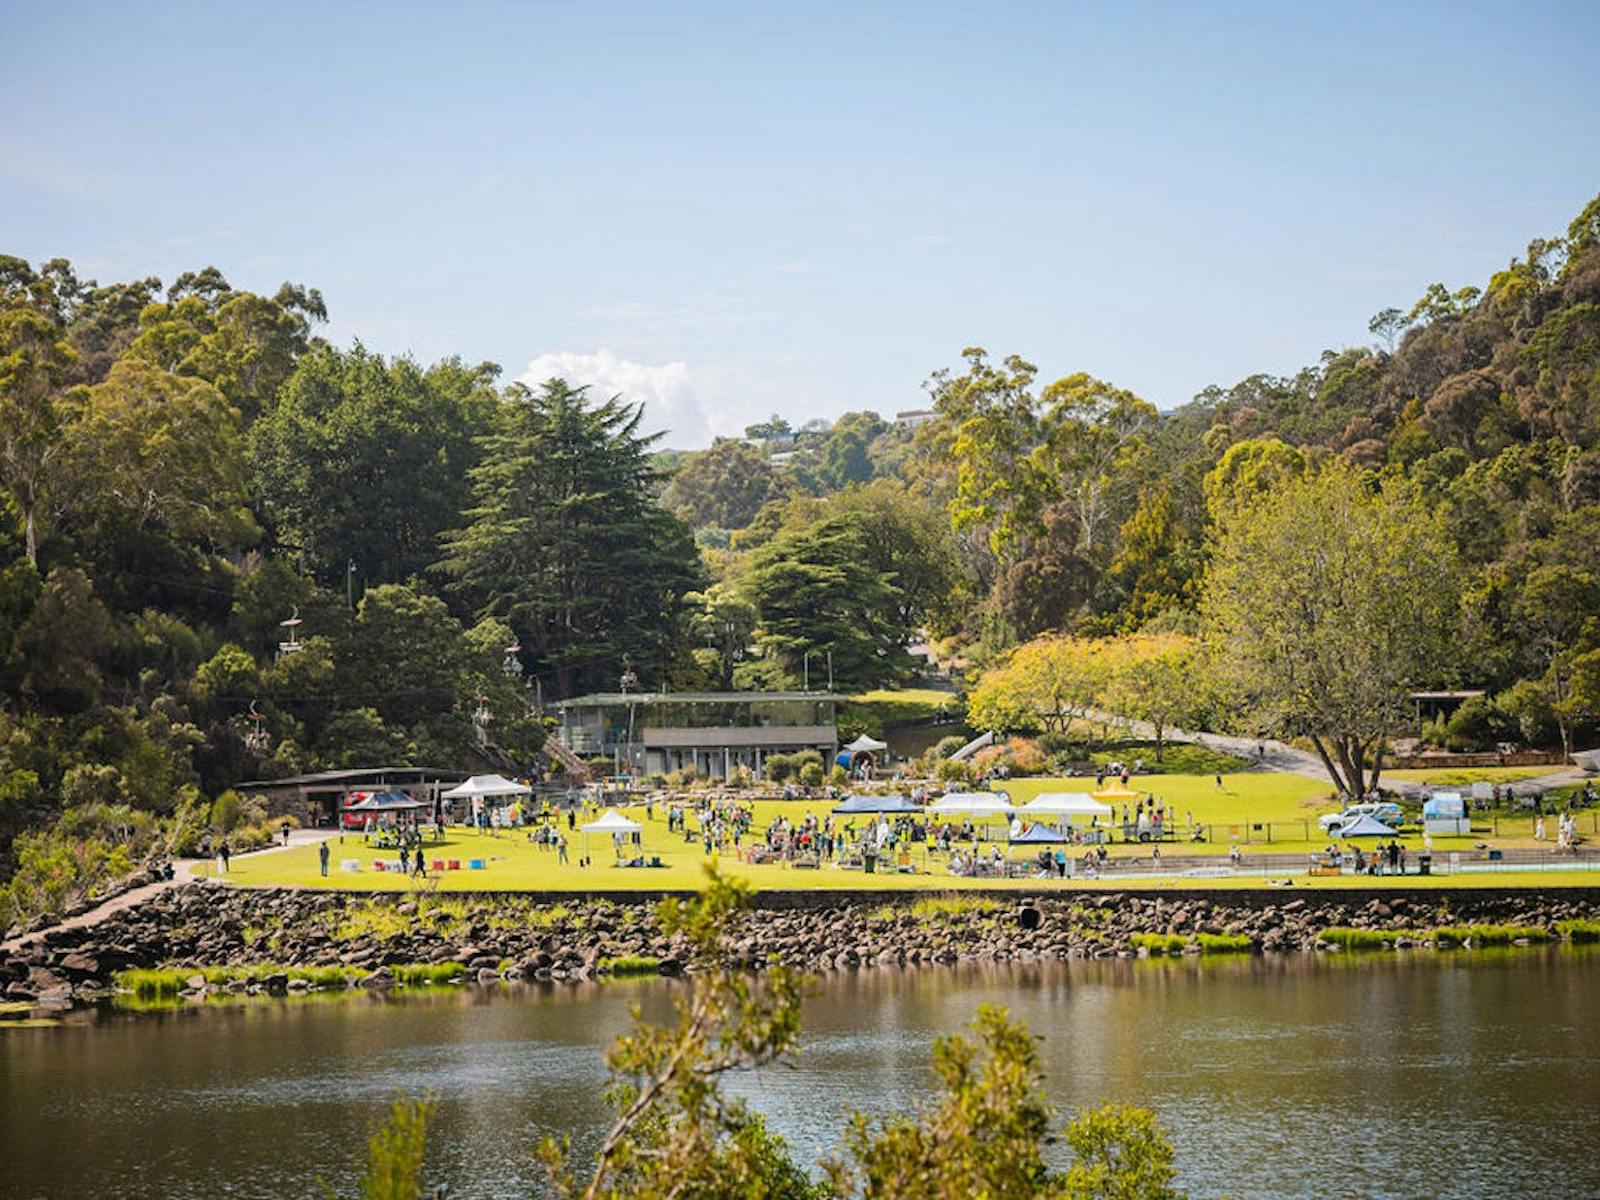 Beautiful and tranquil scenery of Cataract Gorge basin, streams, park, cafe, swimming pool, families